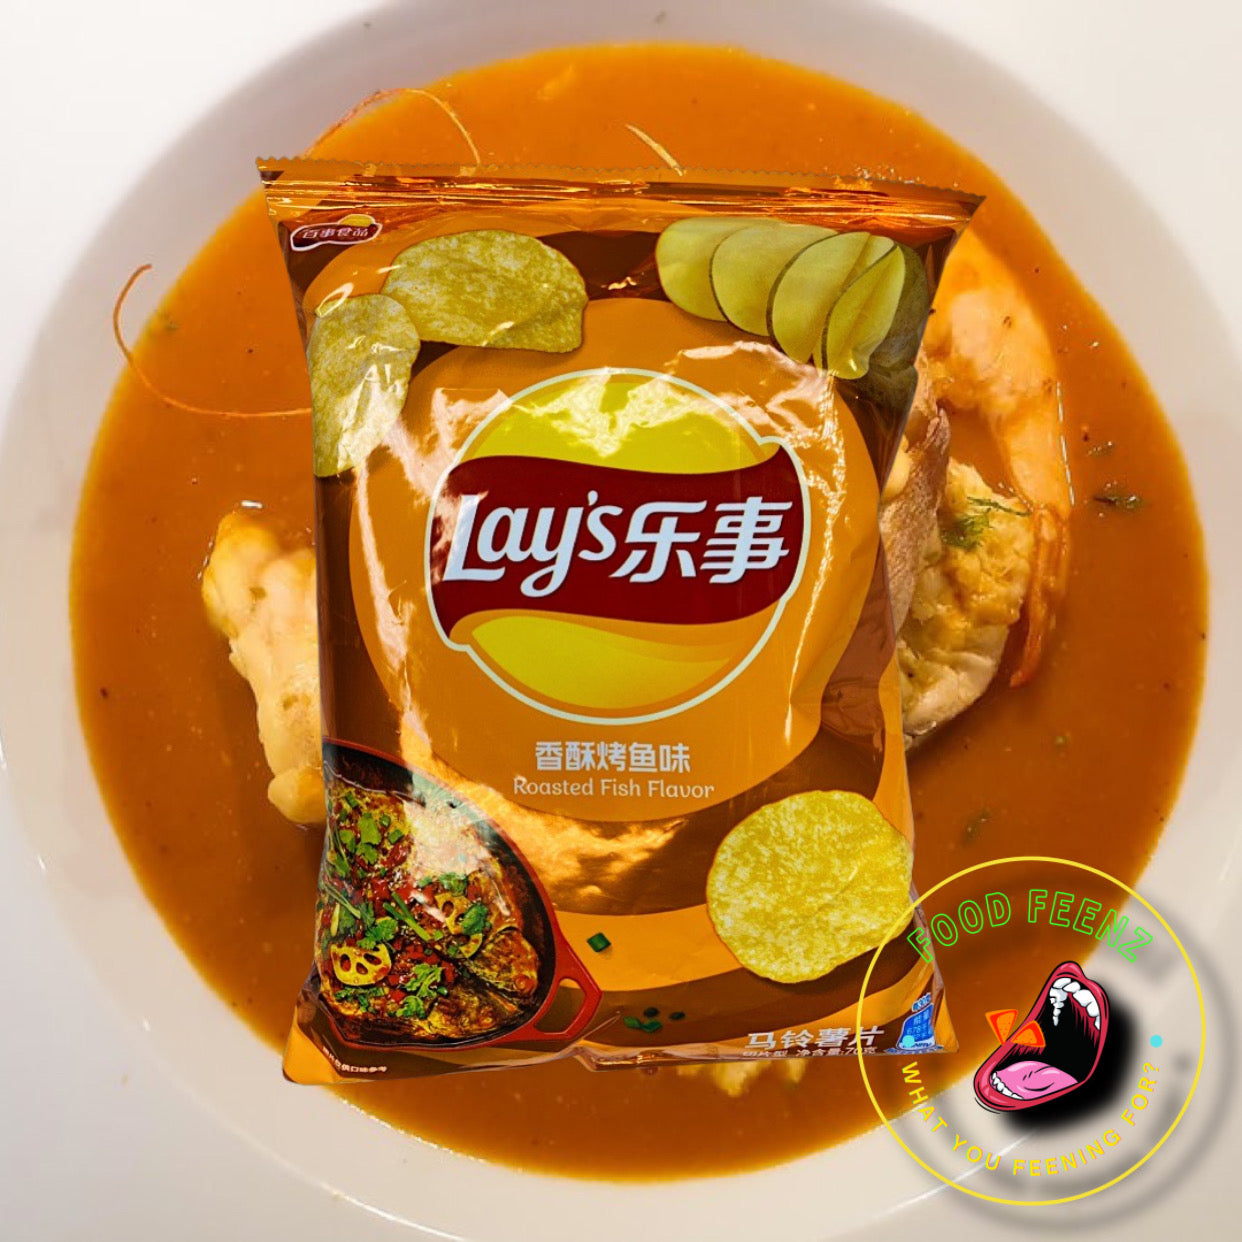 Lay's Roasted Fish Flavor (China)